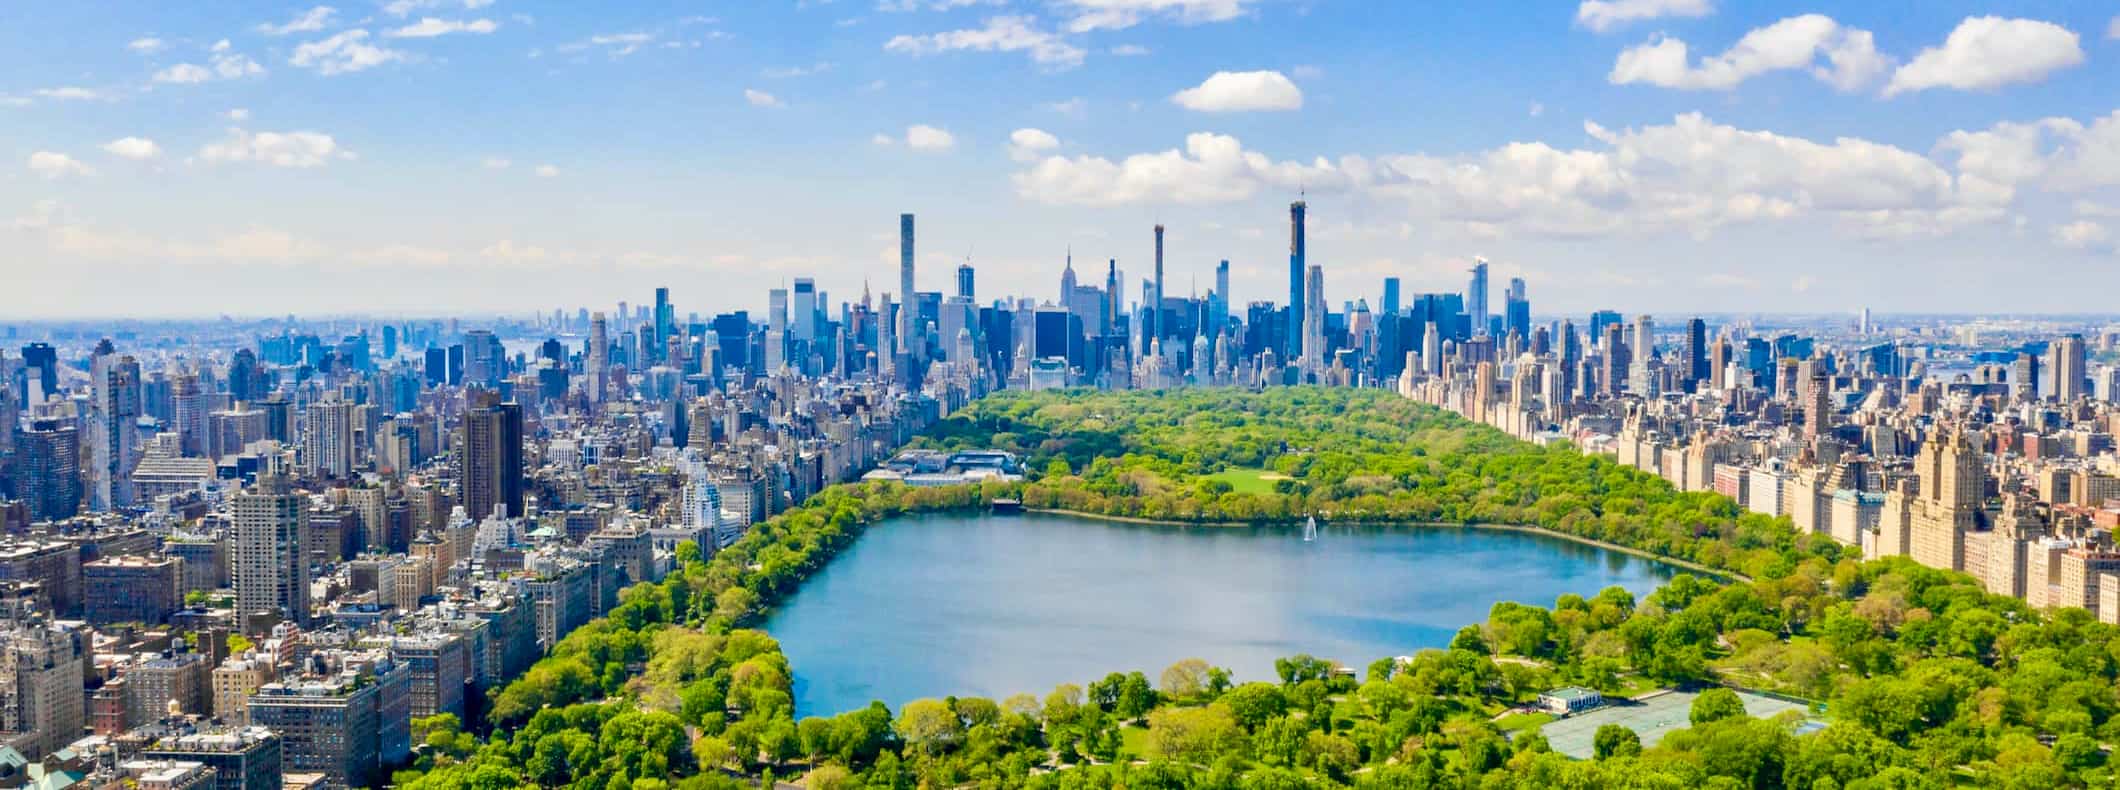 Looking out onto Central Park in New York City, USA on a clear and sunny day